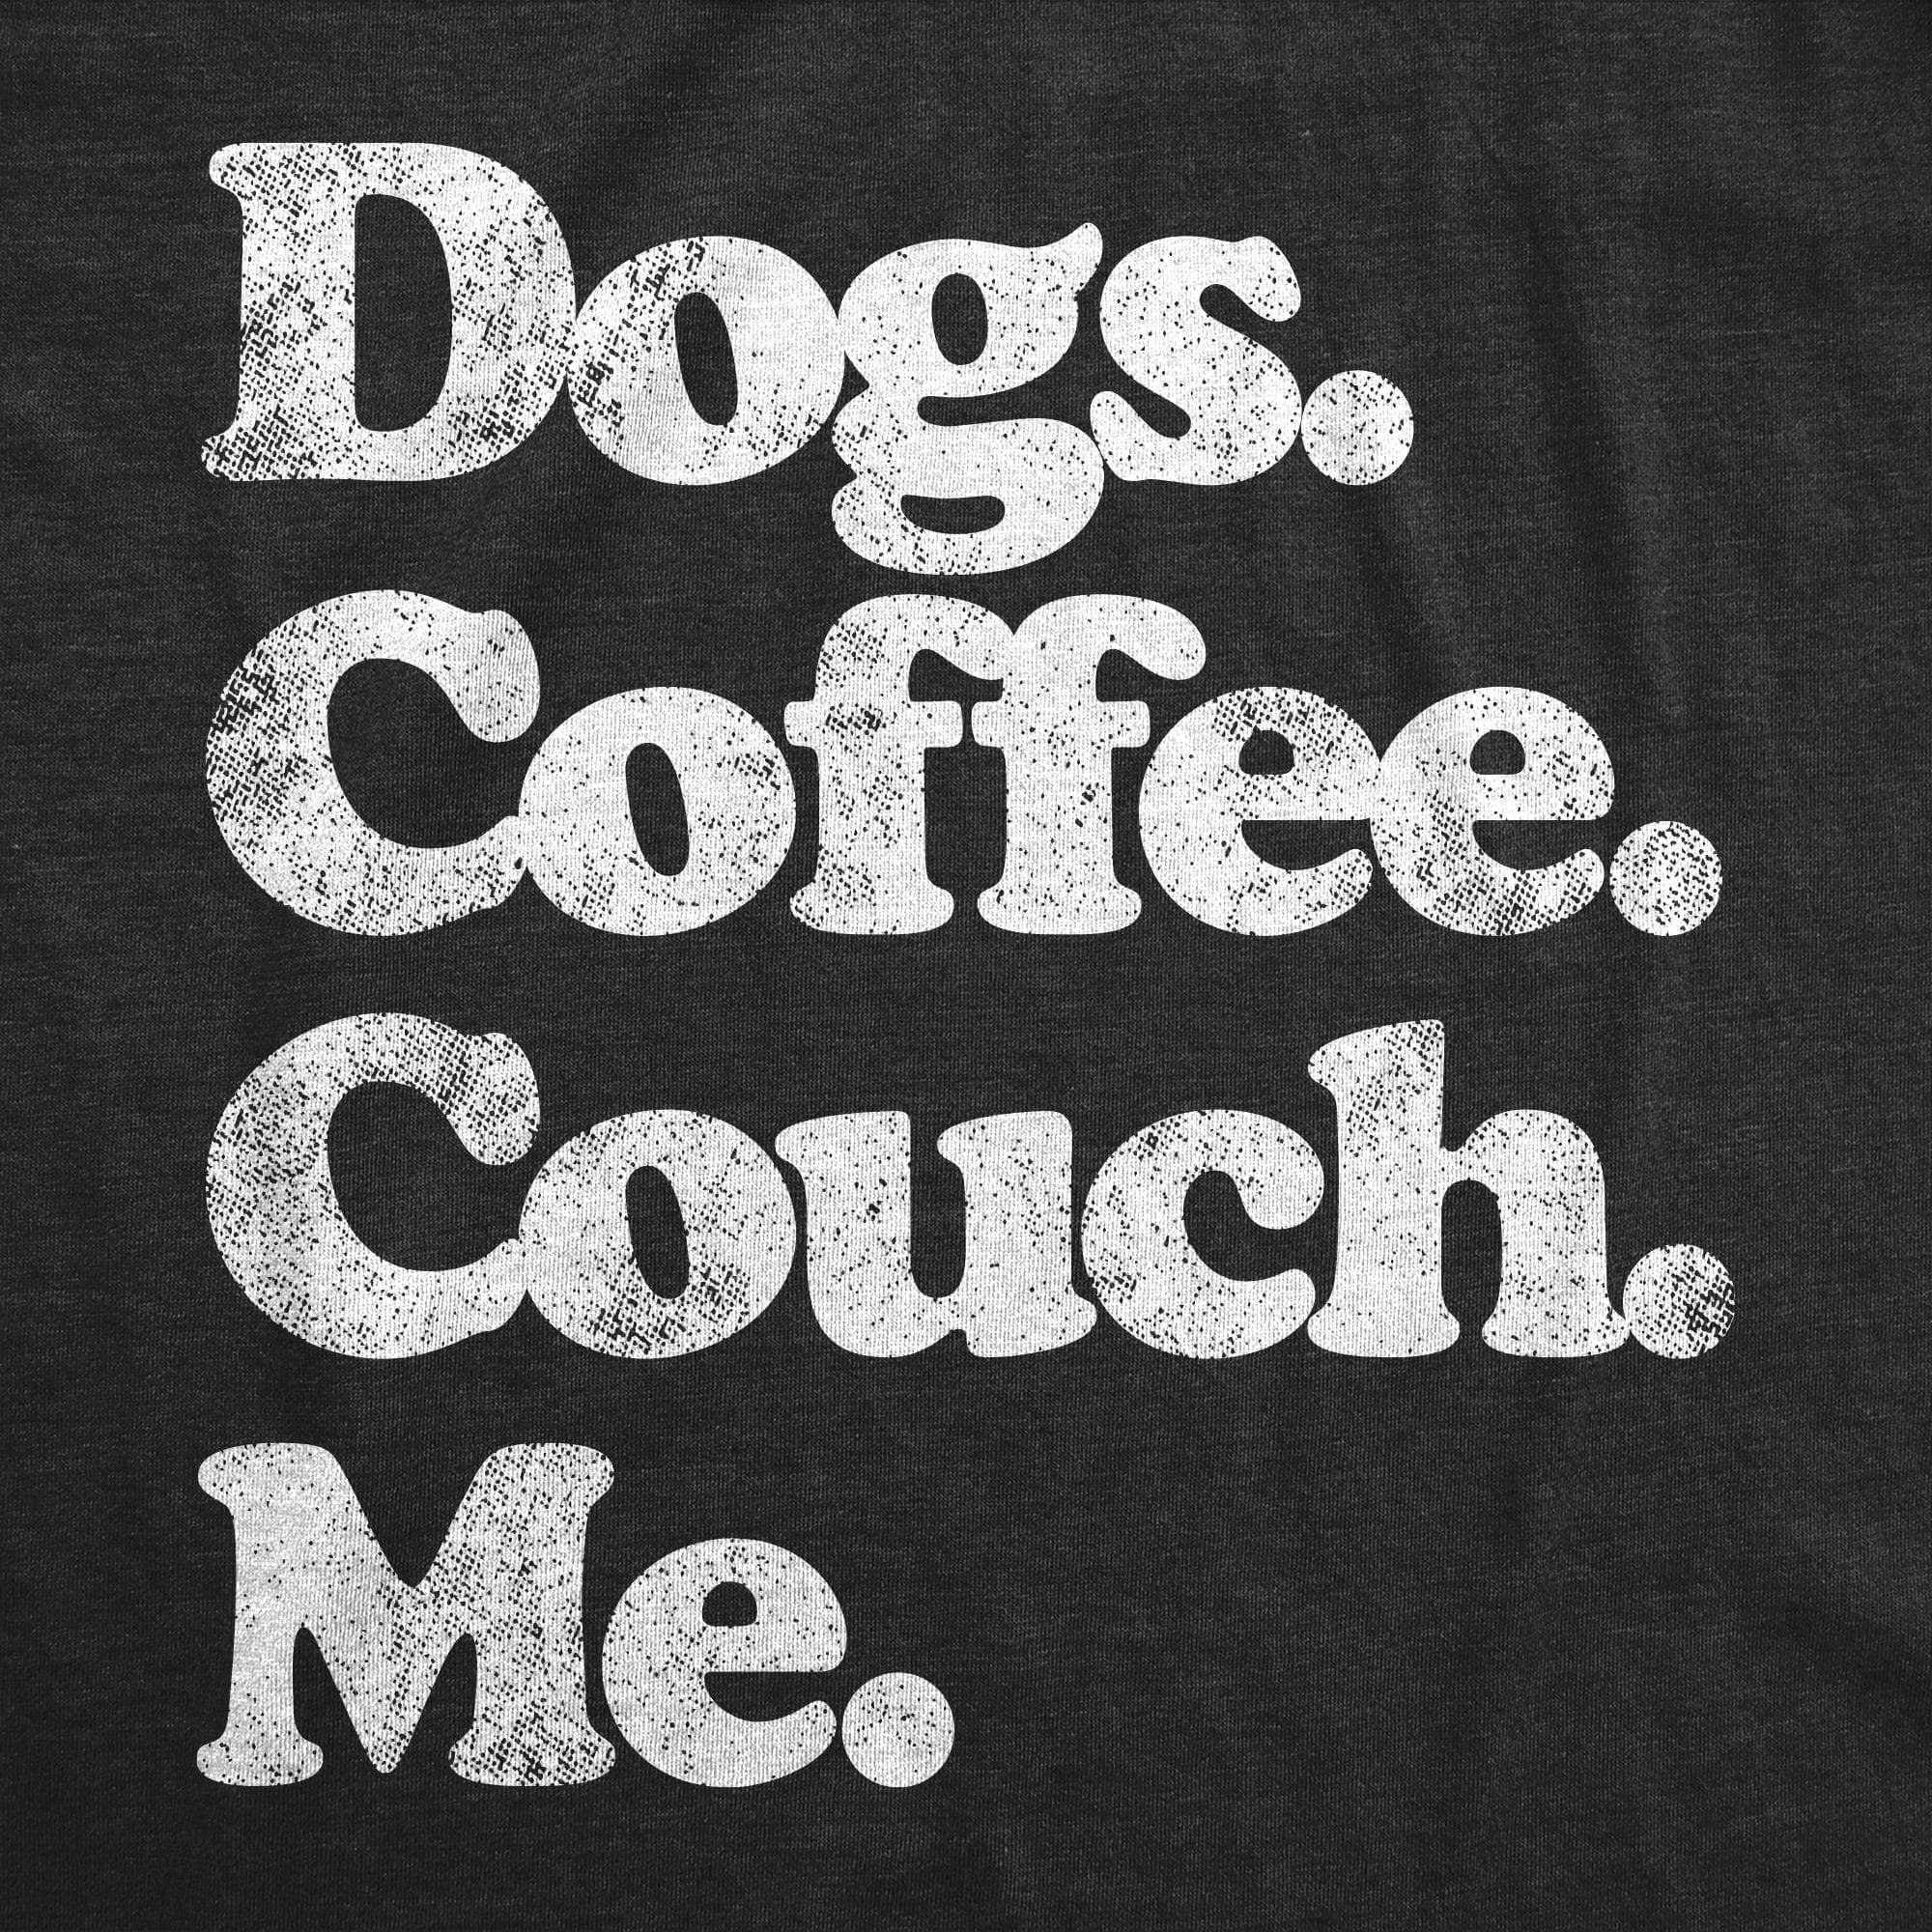 Dogs Coffee Couch Me Crew Neck Sweatshirt  -  Crazy Dog T-Shirts